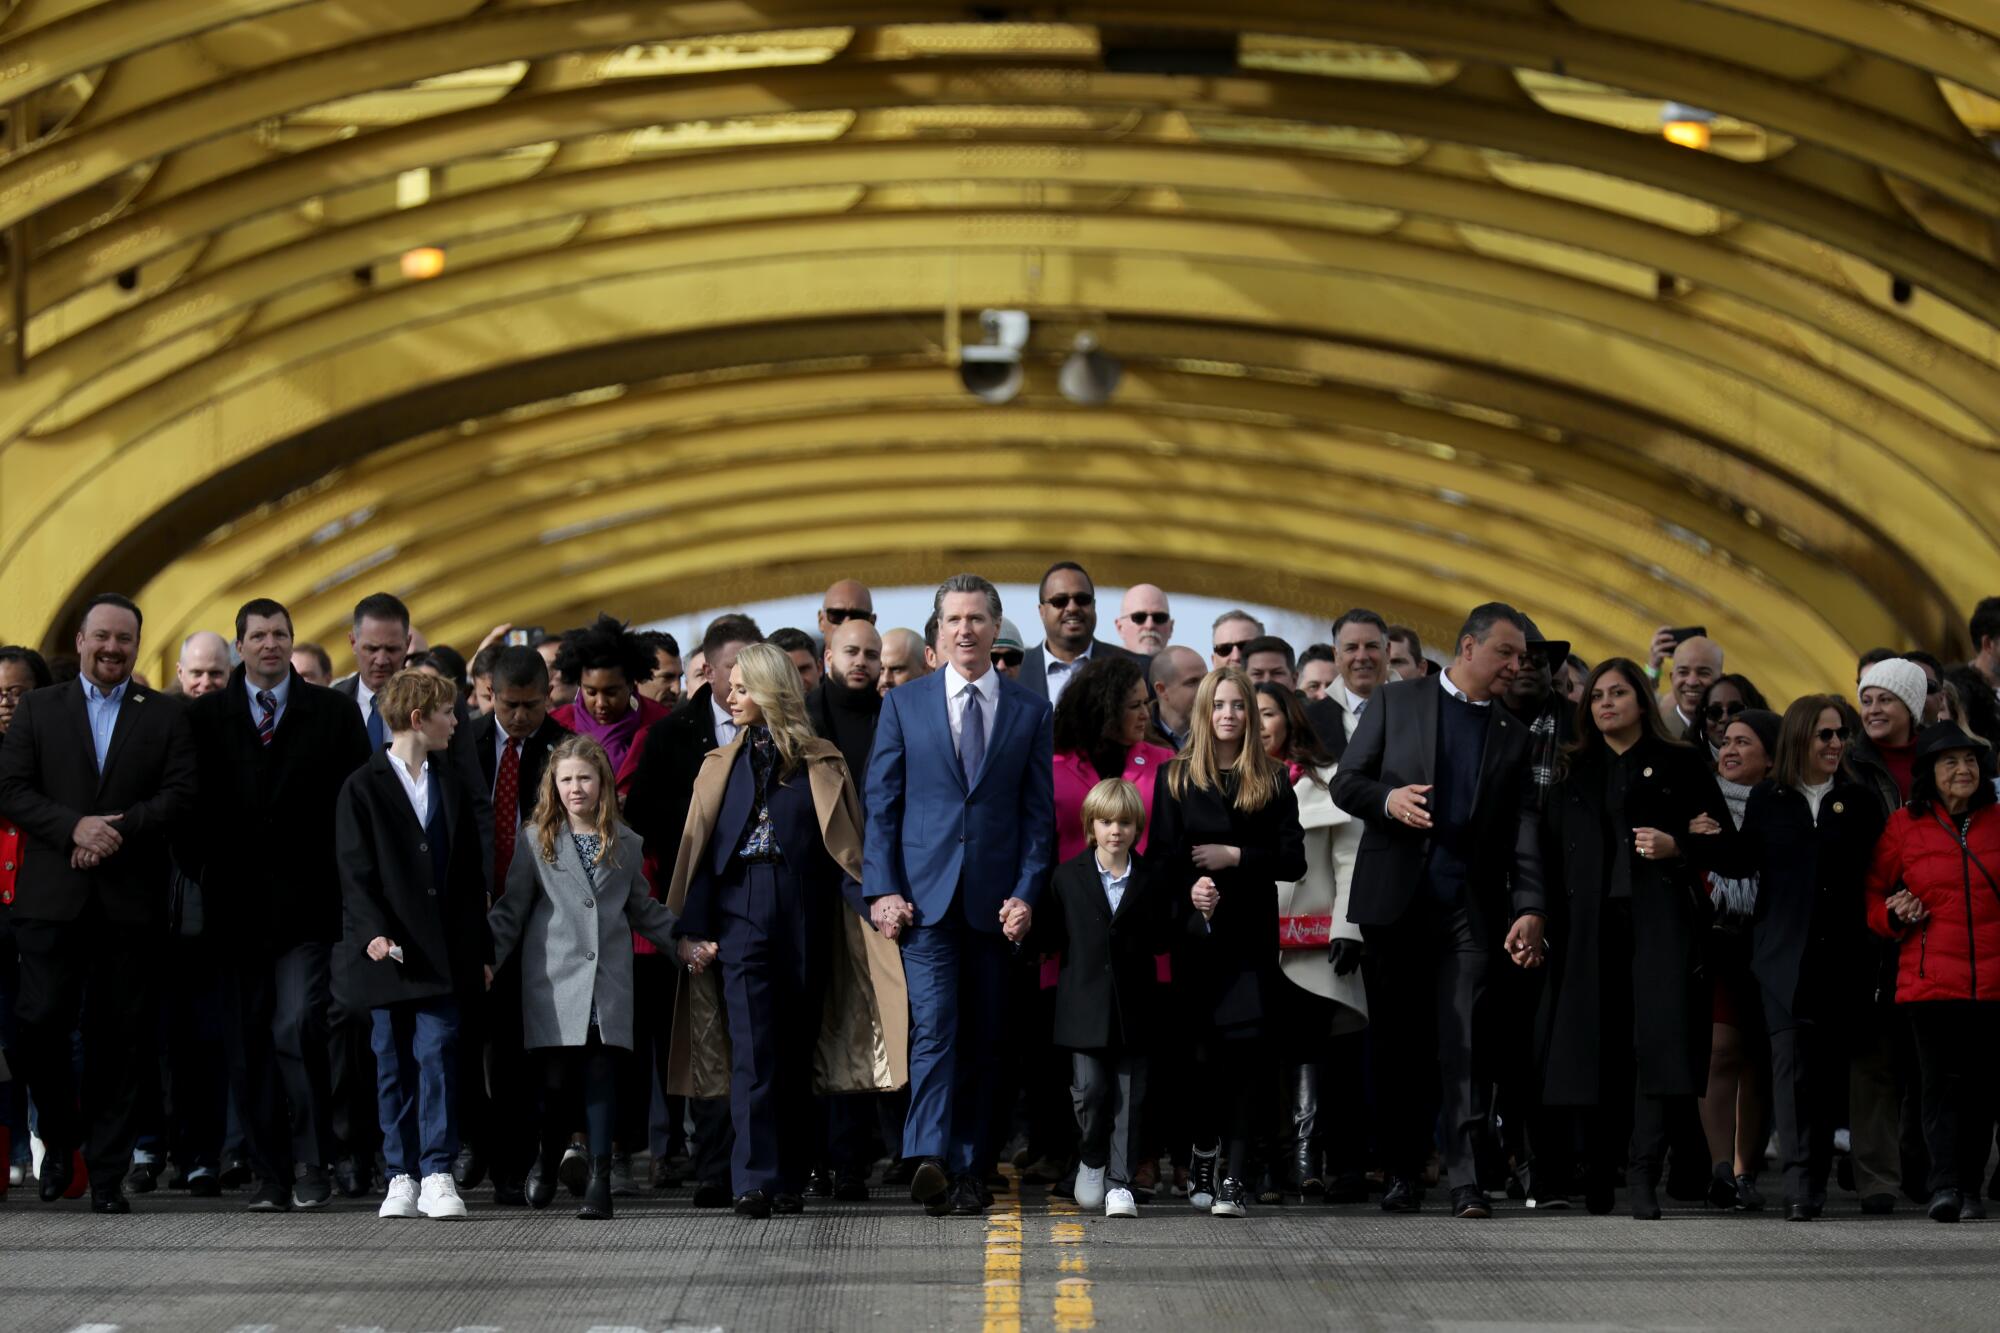 Gov. Gavin Newsom joins the People's March on Tower Bridge during his inauguration ceremony for a second term.